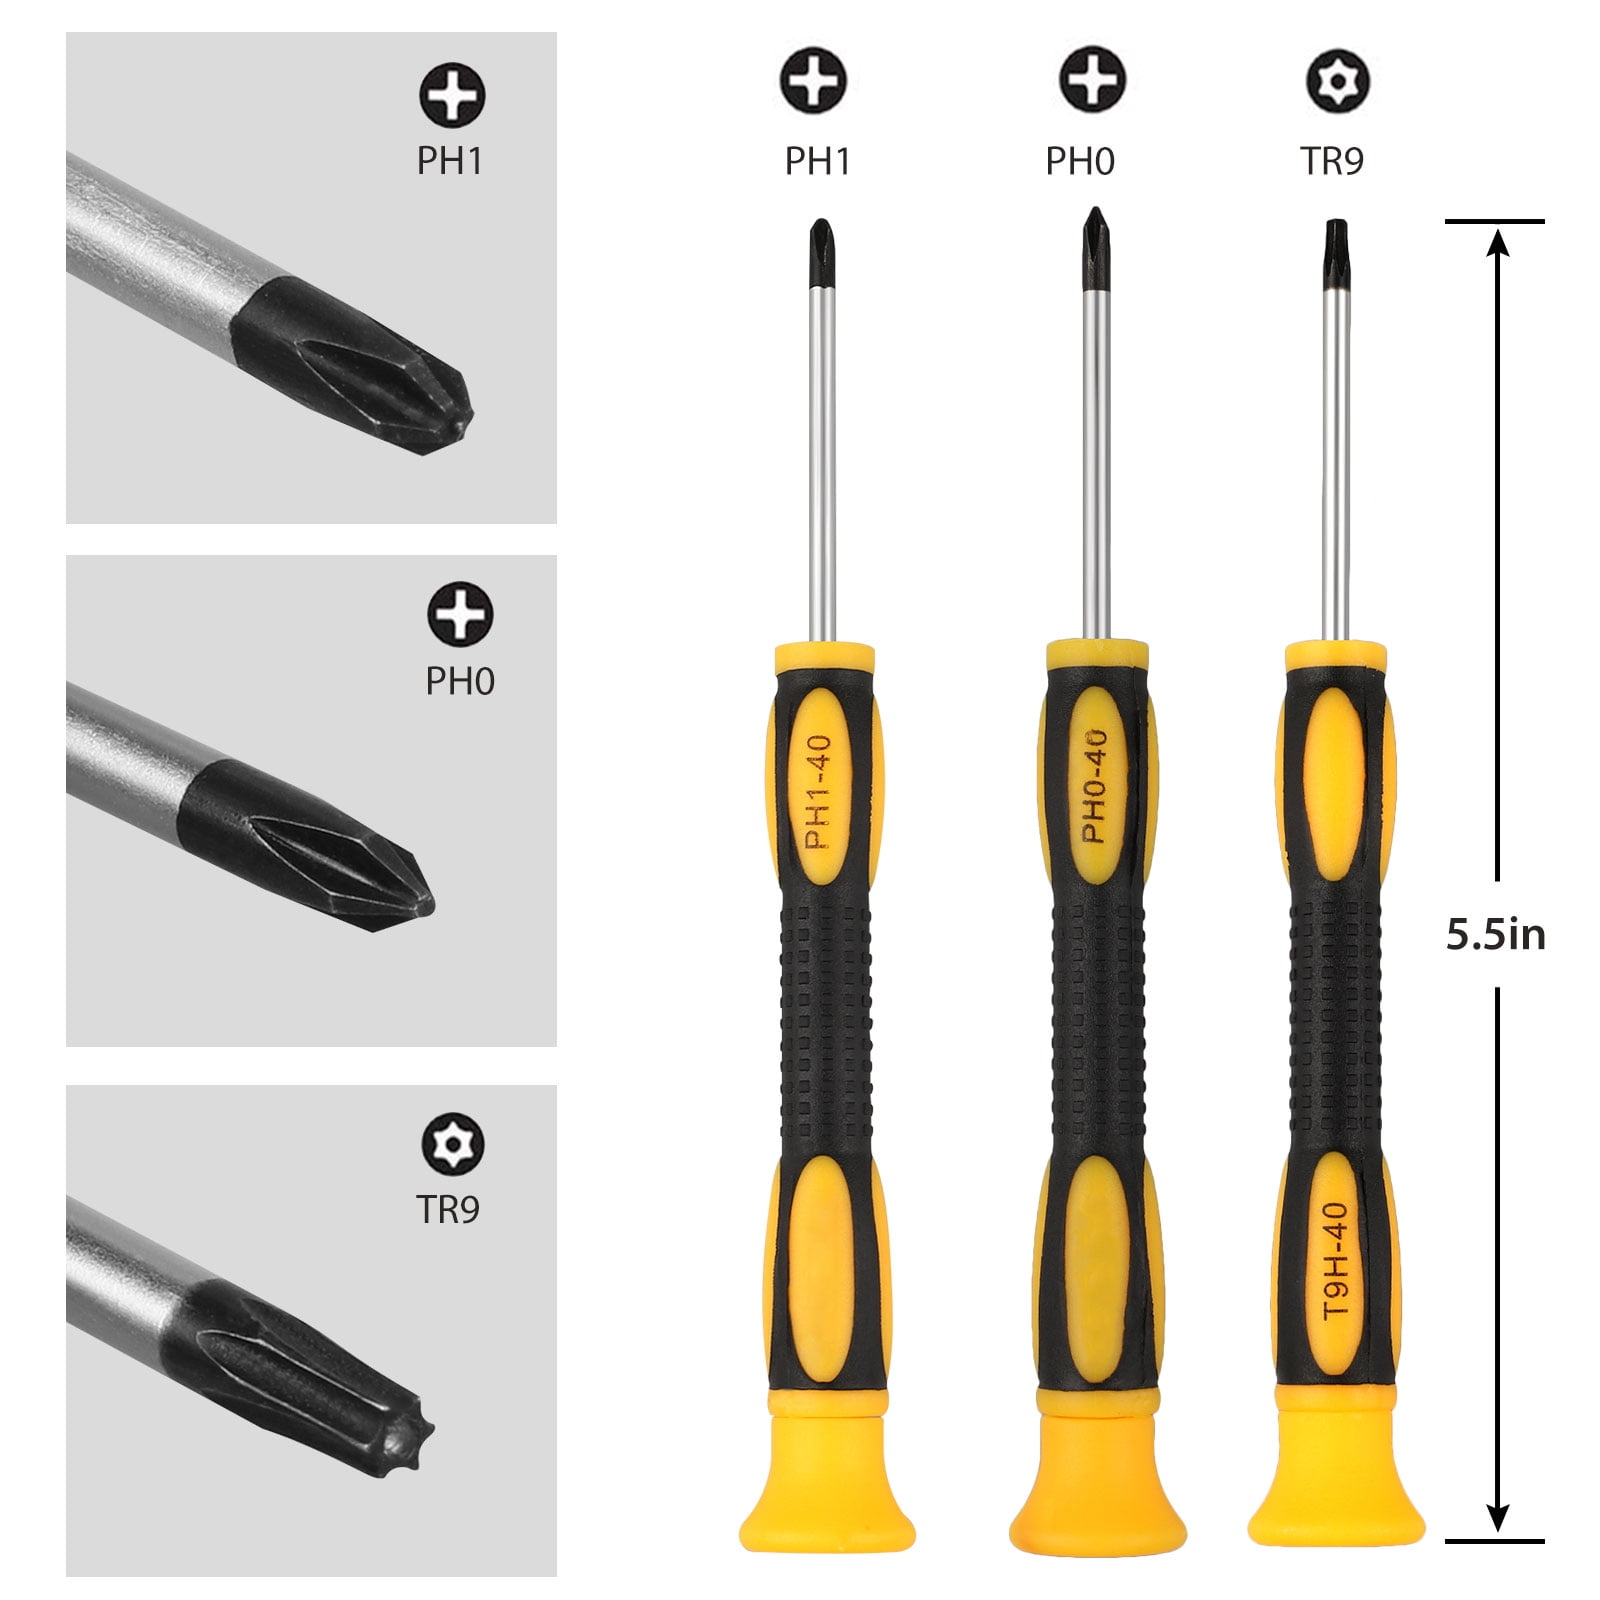 TSV Complete Set Repair Cleaning Tool Kit for Sony Security Screwdriver T9 (TR9) PH0 PH1 Fit for Microsoft Xbox One/Xbox 360, Sony PS3/PS4 Controller/Console - Walmart.com